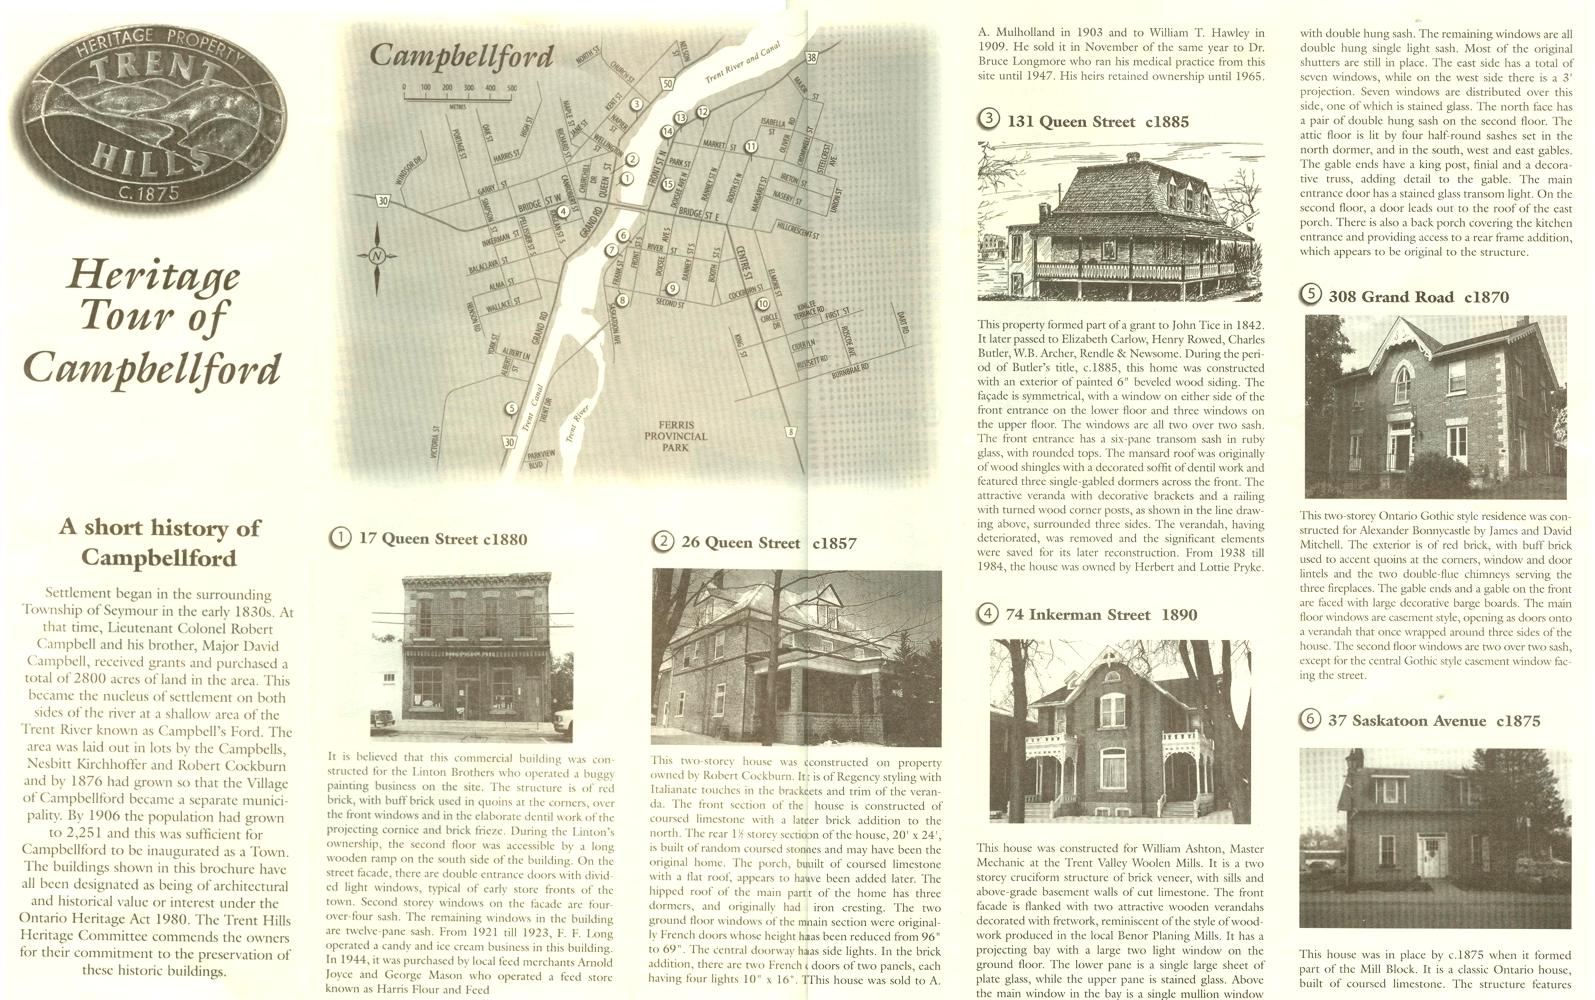 A Short History of Campbellford